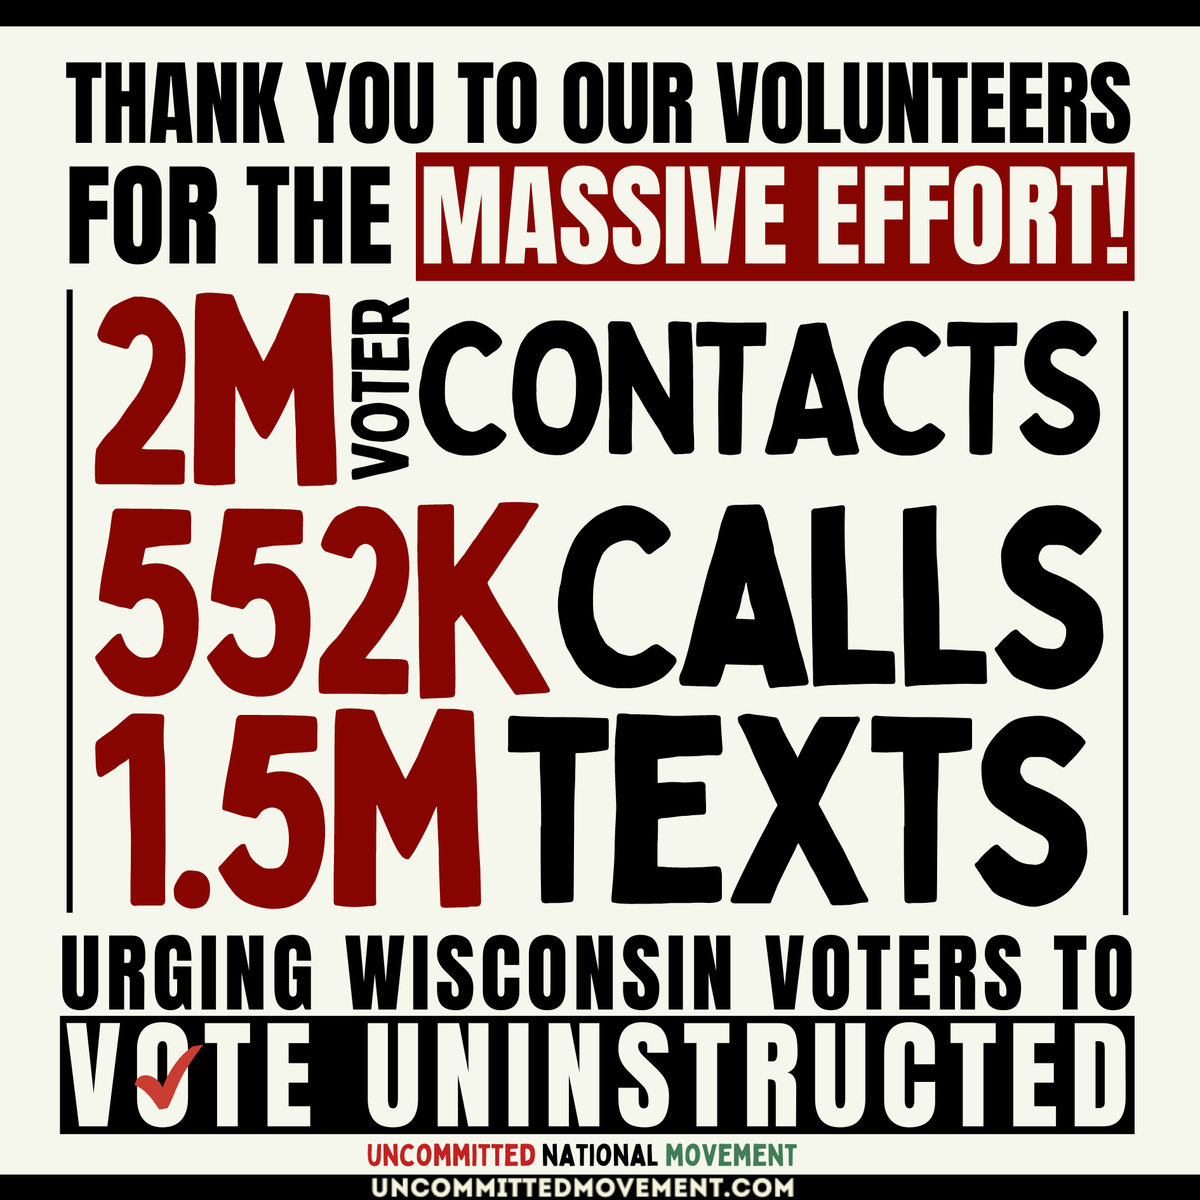 To the heartbeat of our movement, our volunteers: thank you for getting us to over 2 million voter contacts in WI, and helping us tell Biden to stop enabling Israel’s war crimes. Congrats on a well-organized, grassroots campaign, @listentowi. Onward and upward.